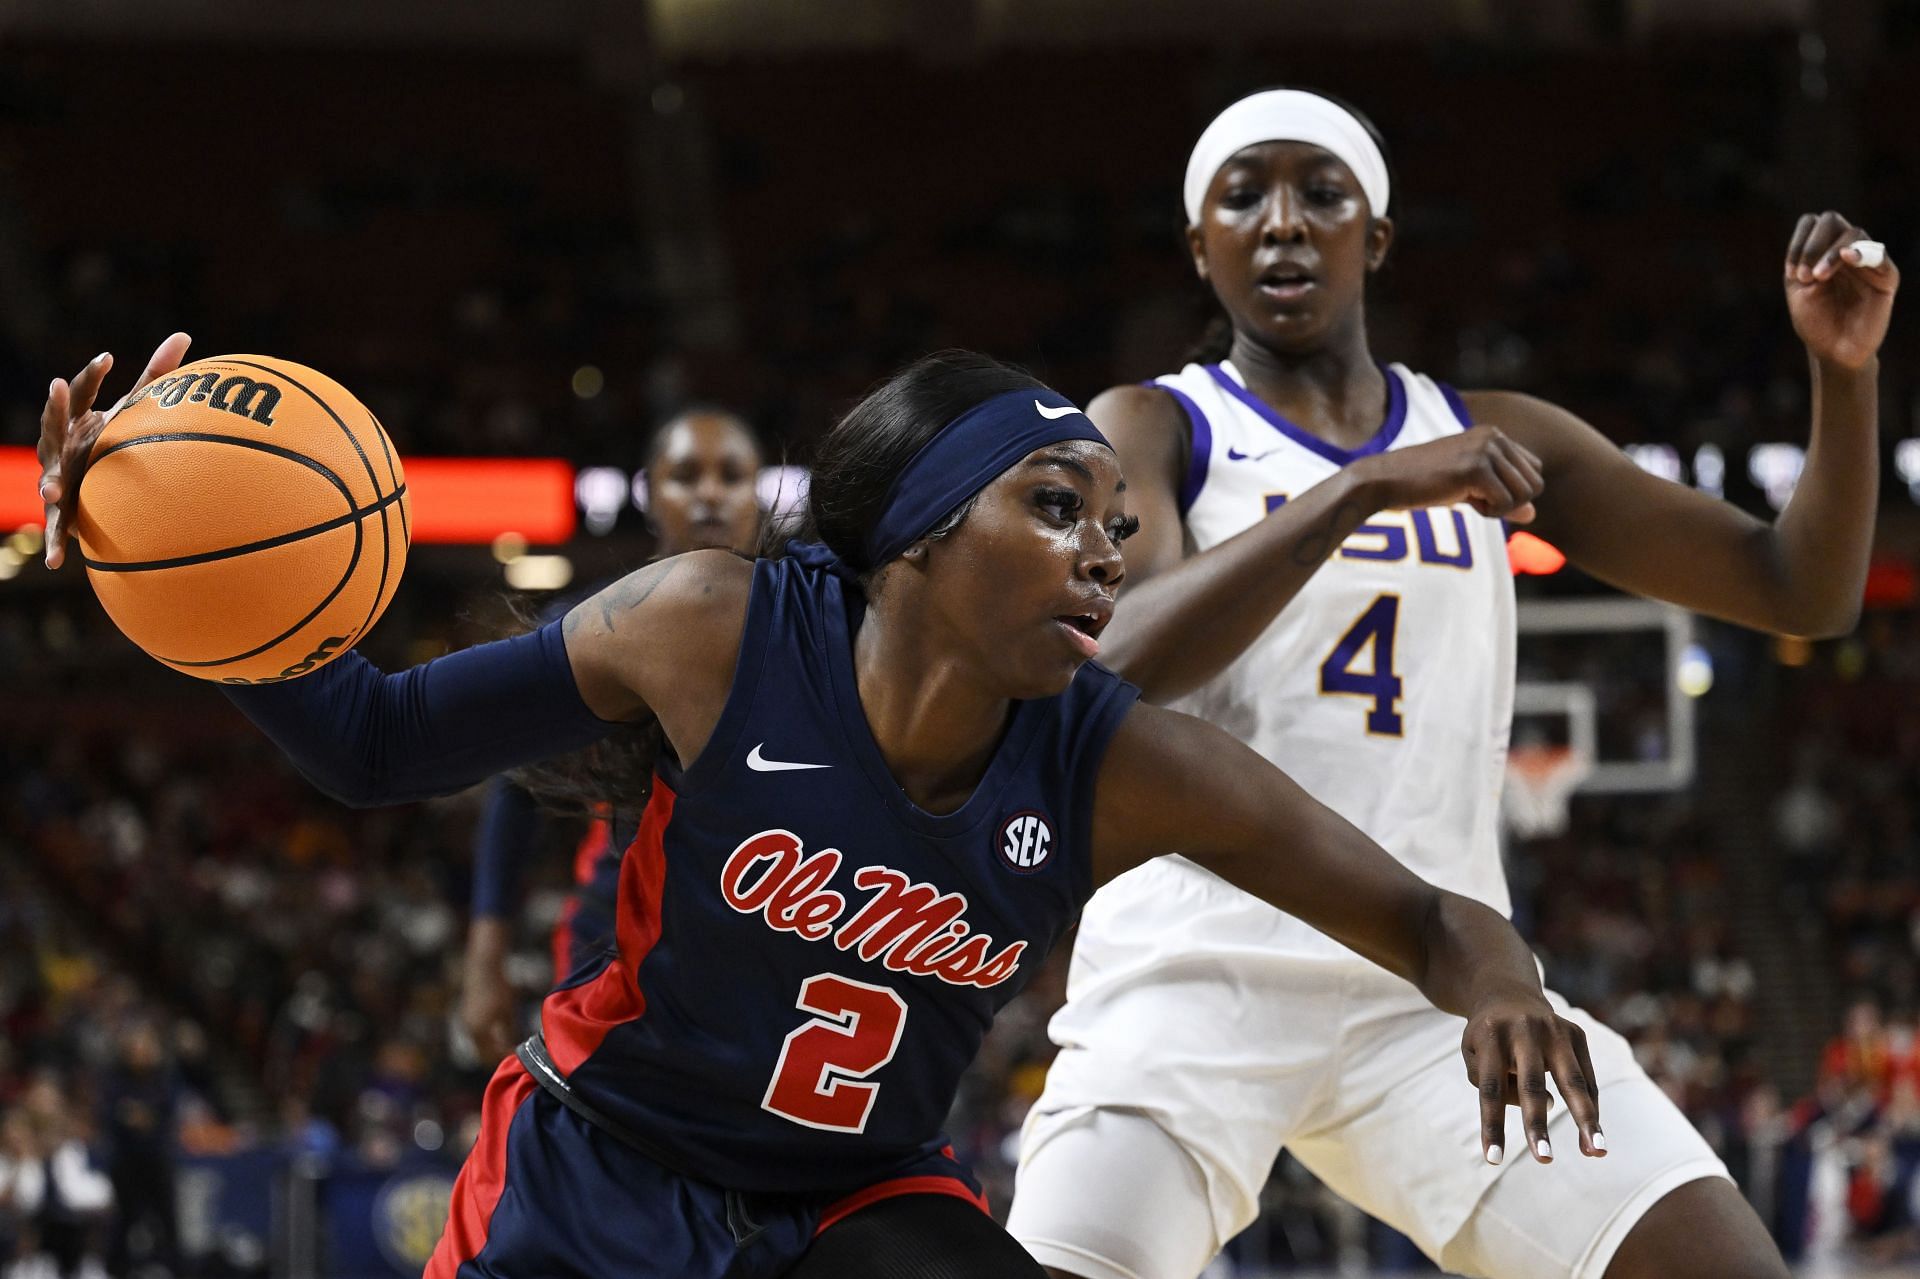 Ole Miss&#039; Marquesha Davis has a lethal midrange jumper that WNBA teams can utilize if they sign her up.